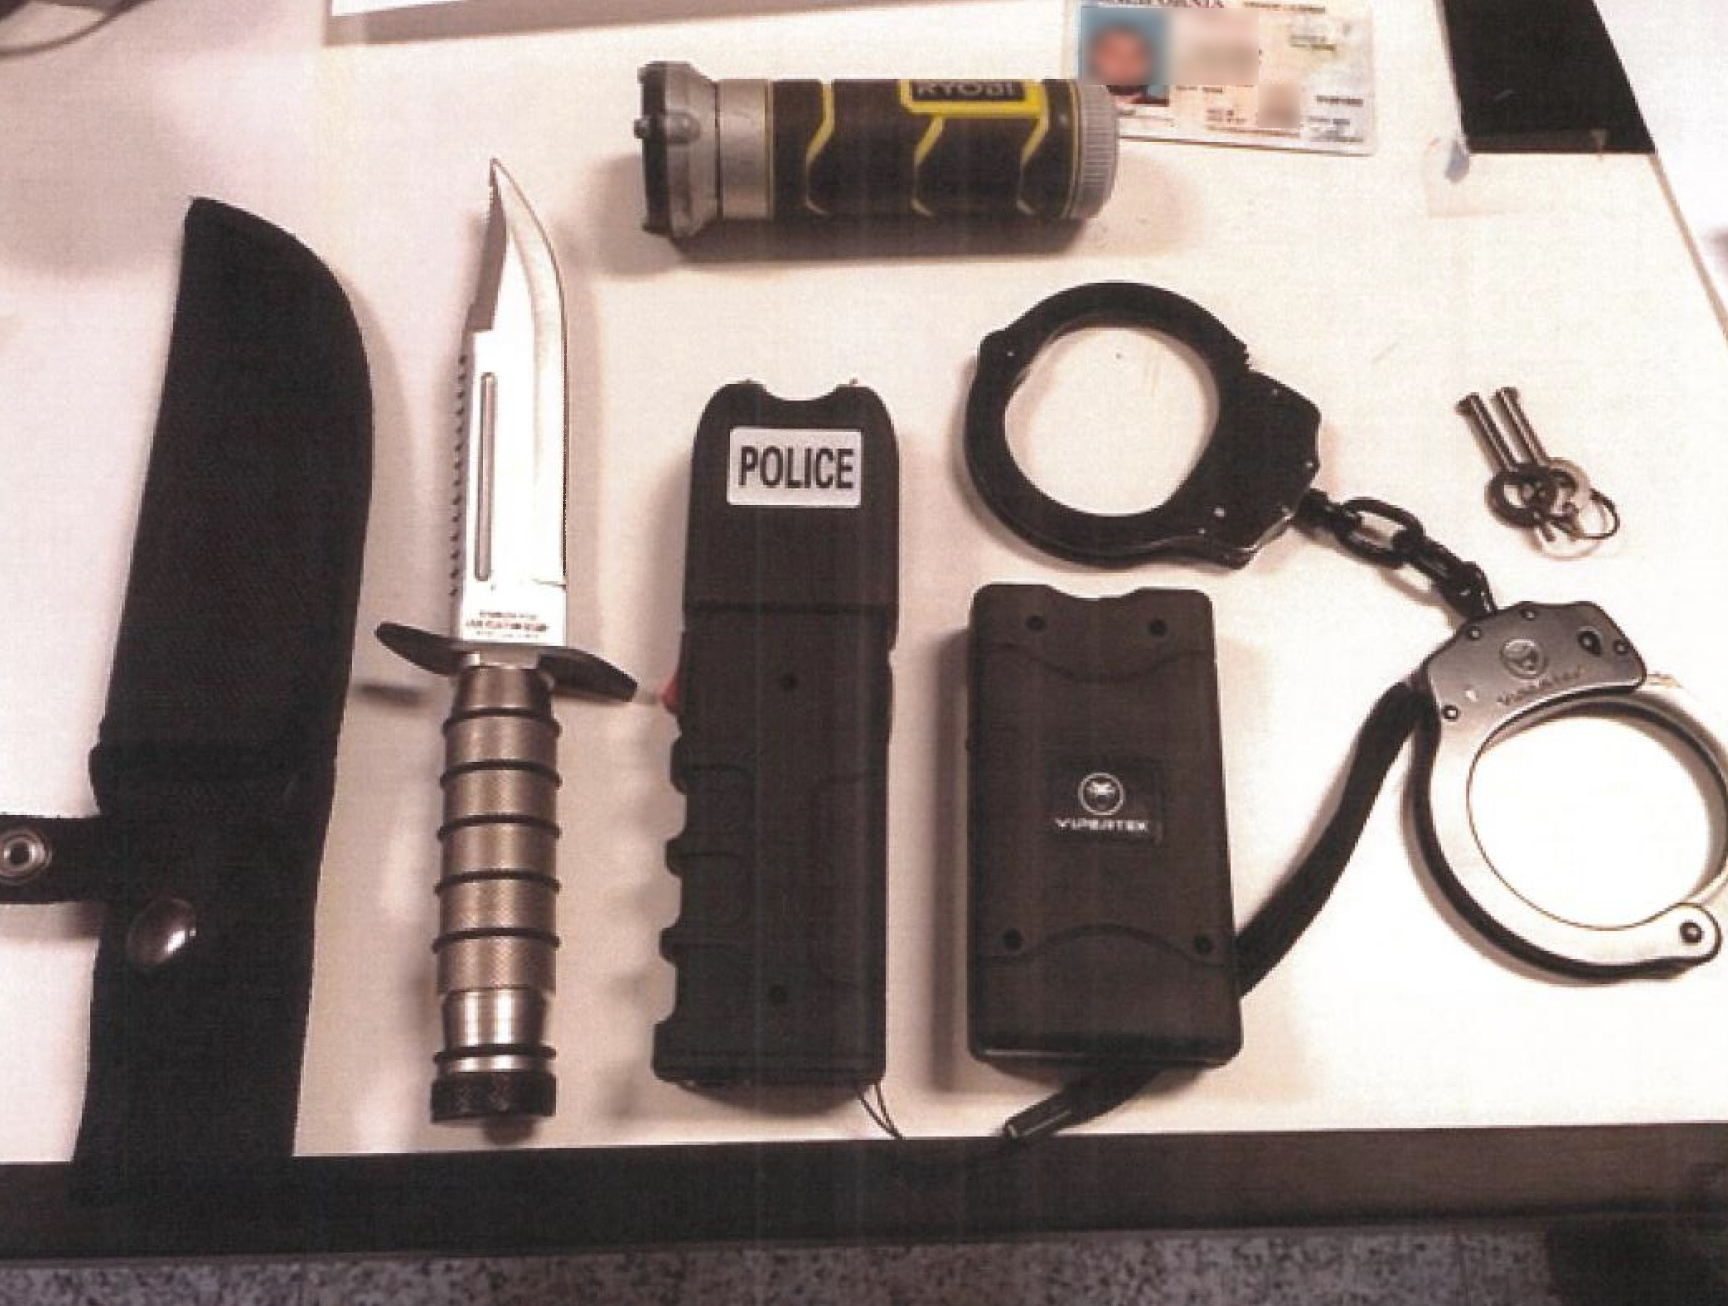 Weapons allegedly found on Greg Baghoomian are seen in an image provided by the L.A. County Sheriff's Department.